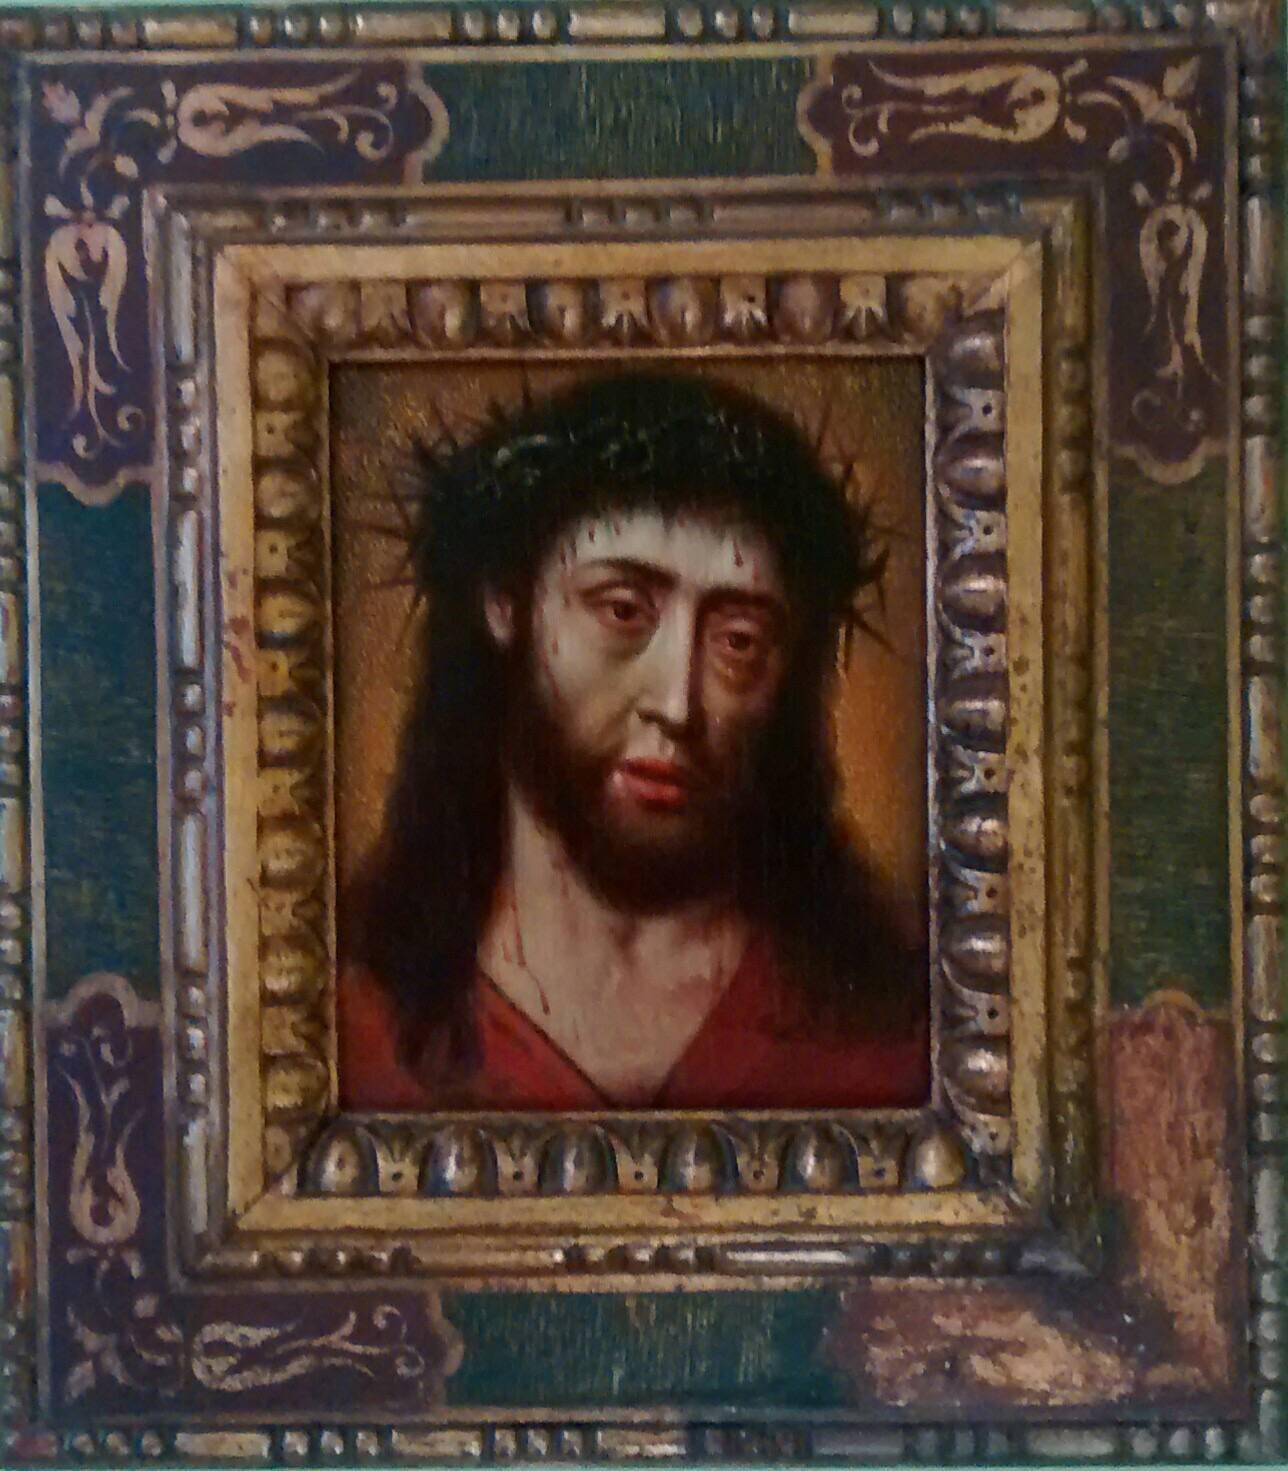 CHRIST
Religious art
Oil on board.
20x15 Cm without frame
37x33 Cm with frame
Beautiful